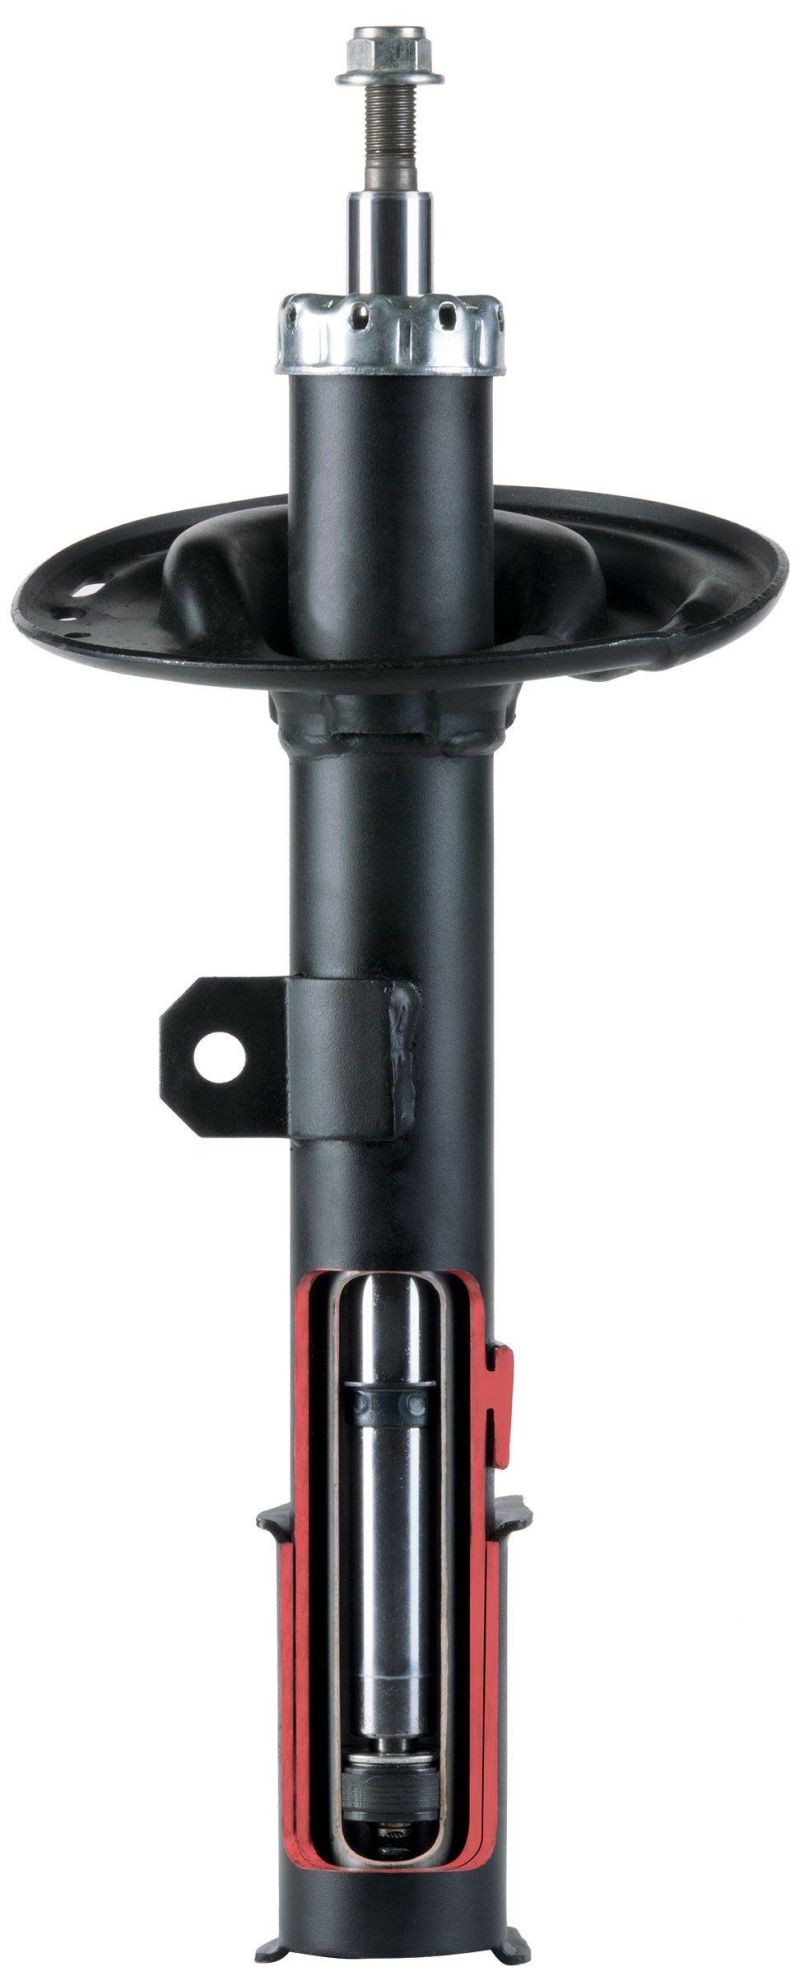 Shock Absorber for 54661-F2500 for Hyundai Elantra 2018 High Quality and Good Price